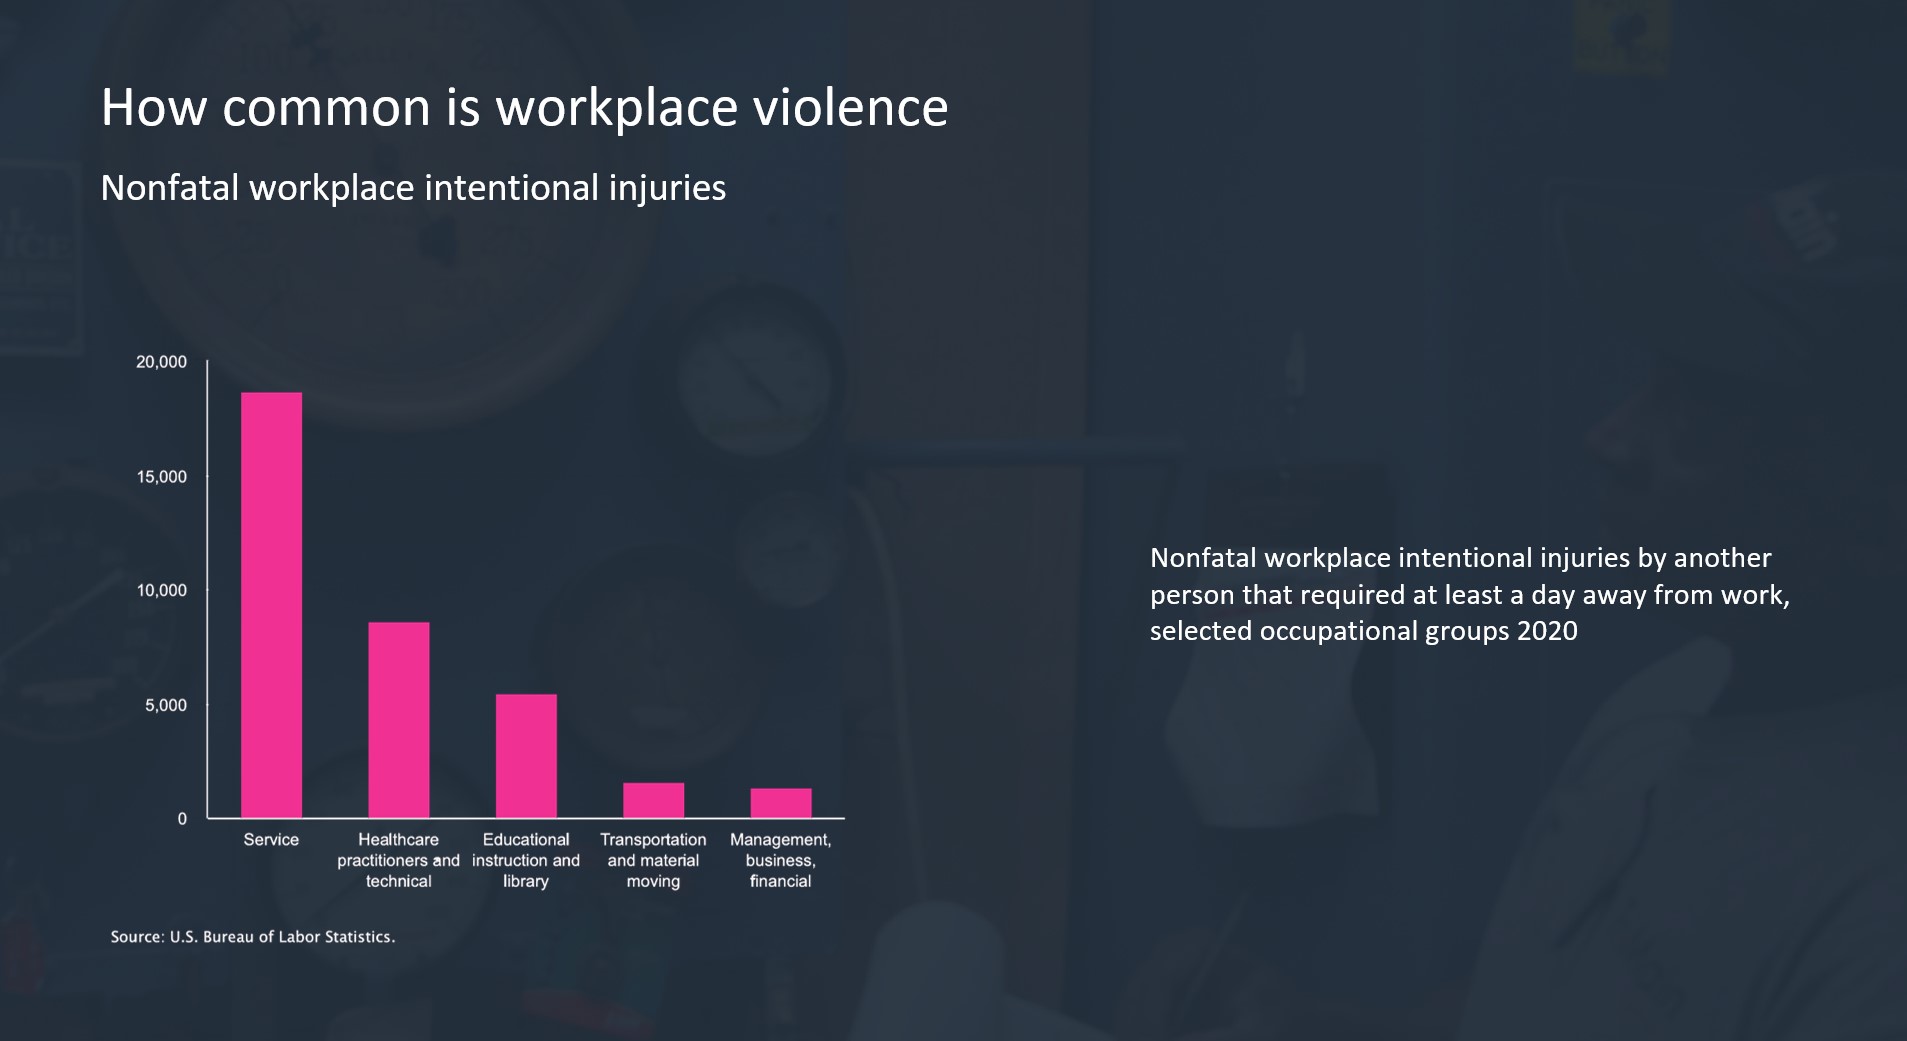 Image entitled in white: how common is workplace violence? with subheader: nonfatal workplace intentional injuries. Pink bar graph shows the industries in order of most to least injuries, with service having around 17,000; healthcare around 8,000; education and library around 6,000; transportation and material moving around 1,000; and management, business and financial around 1,000. The data is from 2020